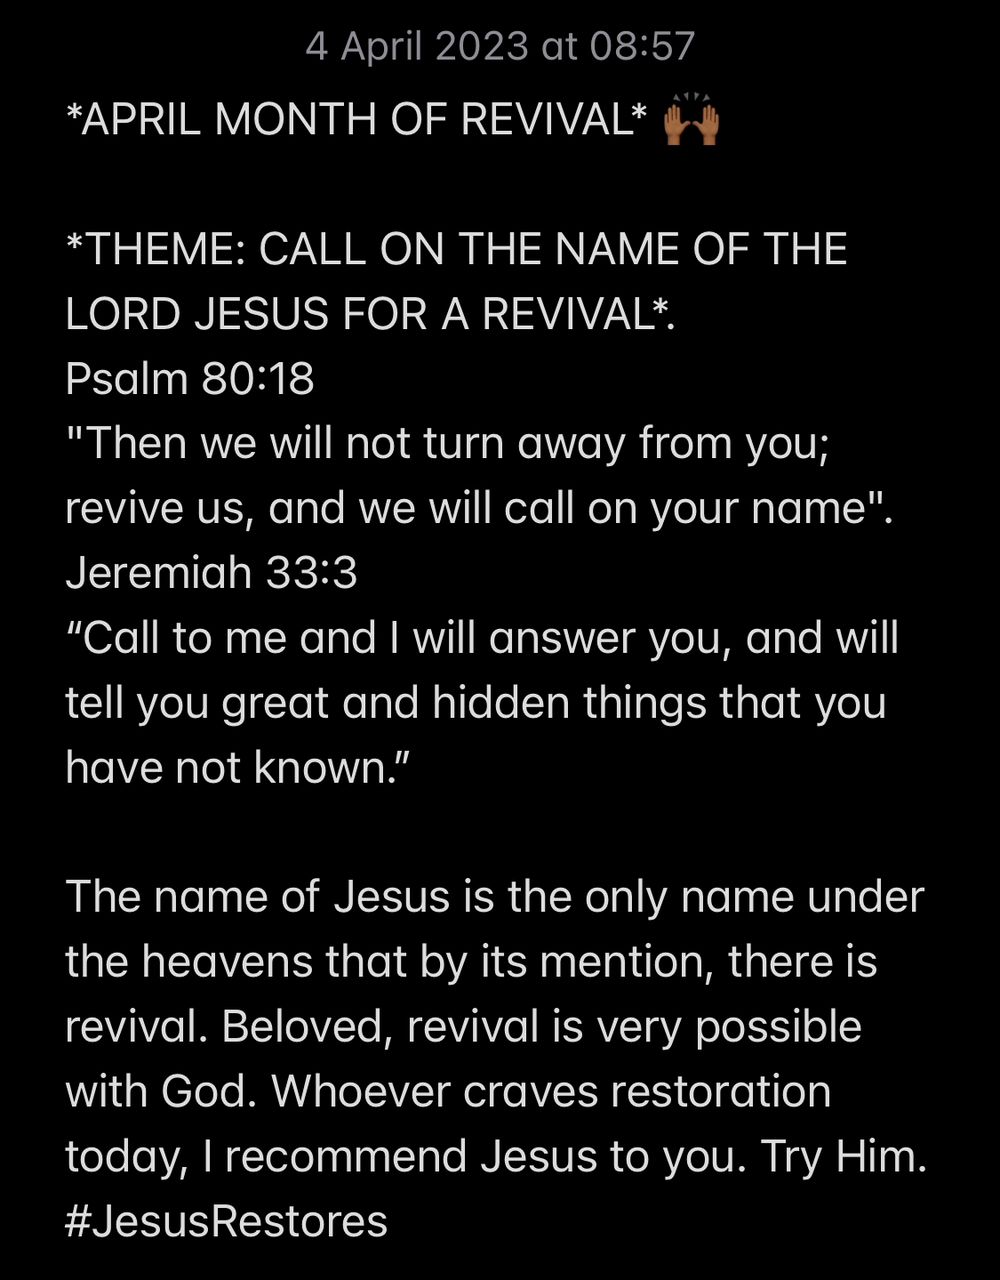 CALL ON THE NAME OF THE LORD JESUS FOR A REVIVAL.